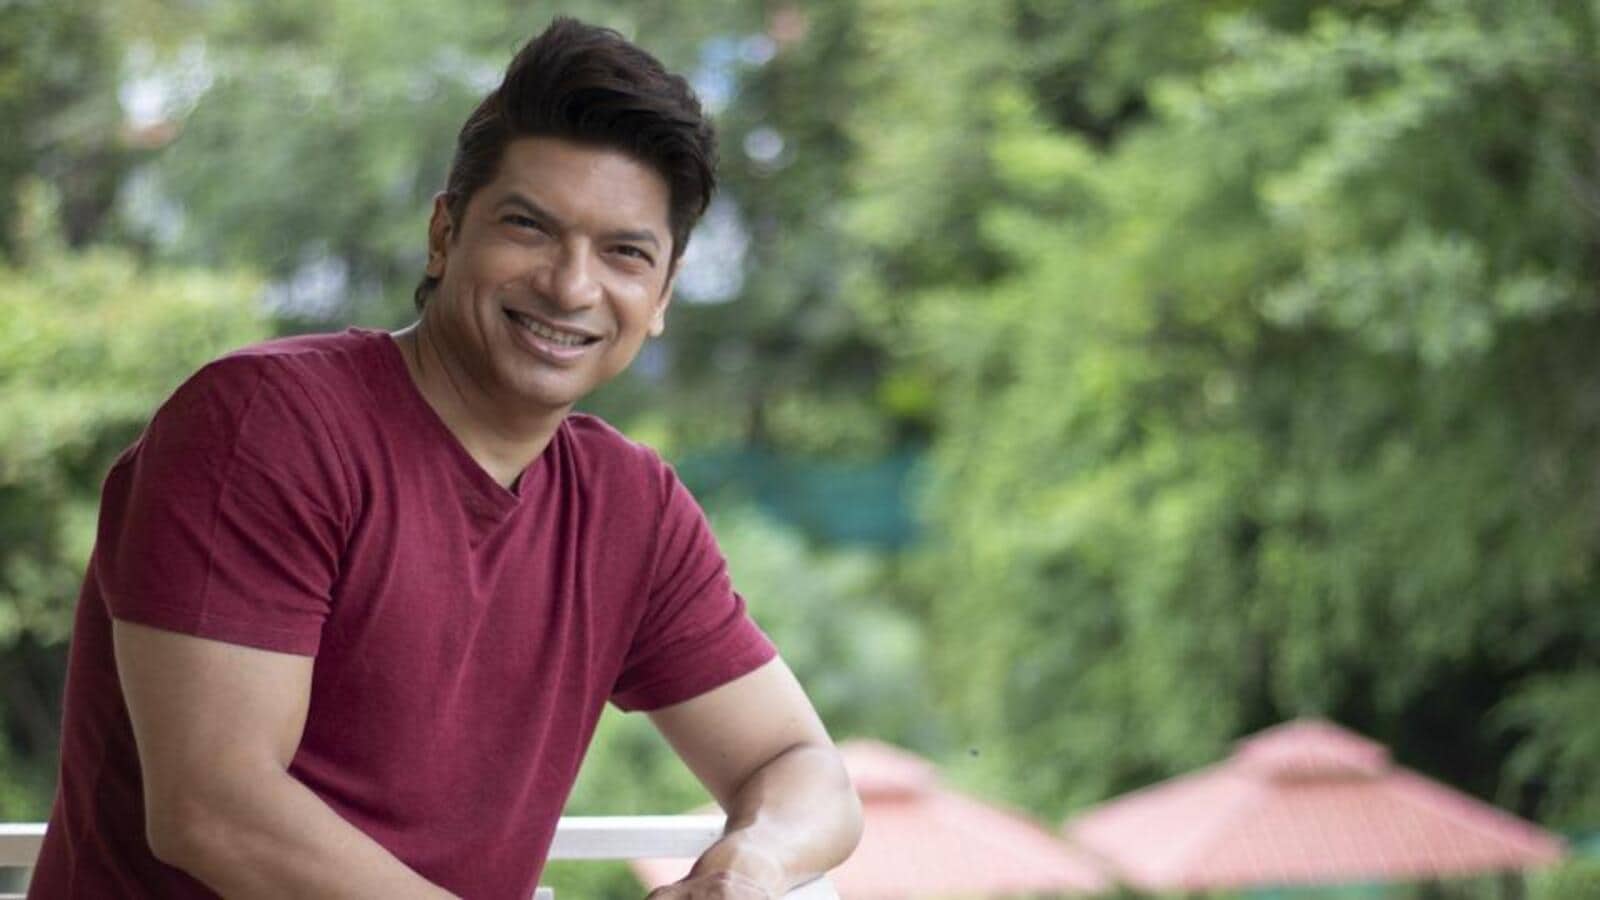 Shaan warns young singers to not sell their soul to music companies: Don’t become slave to the system